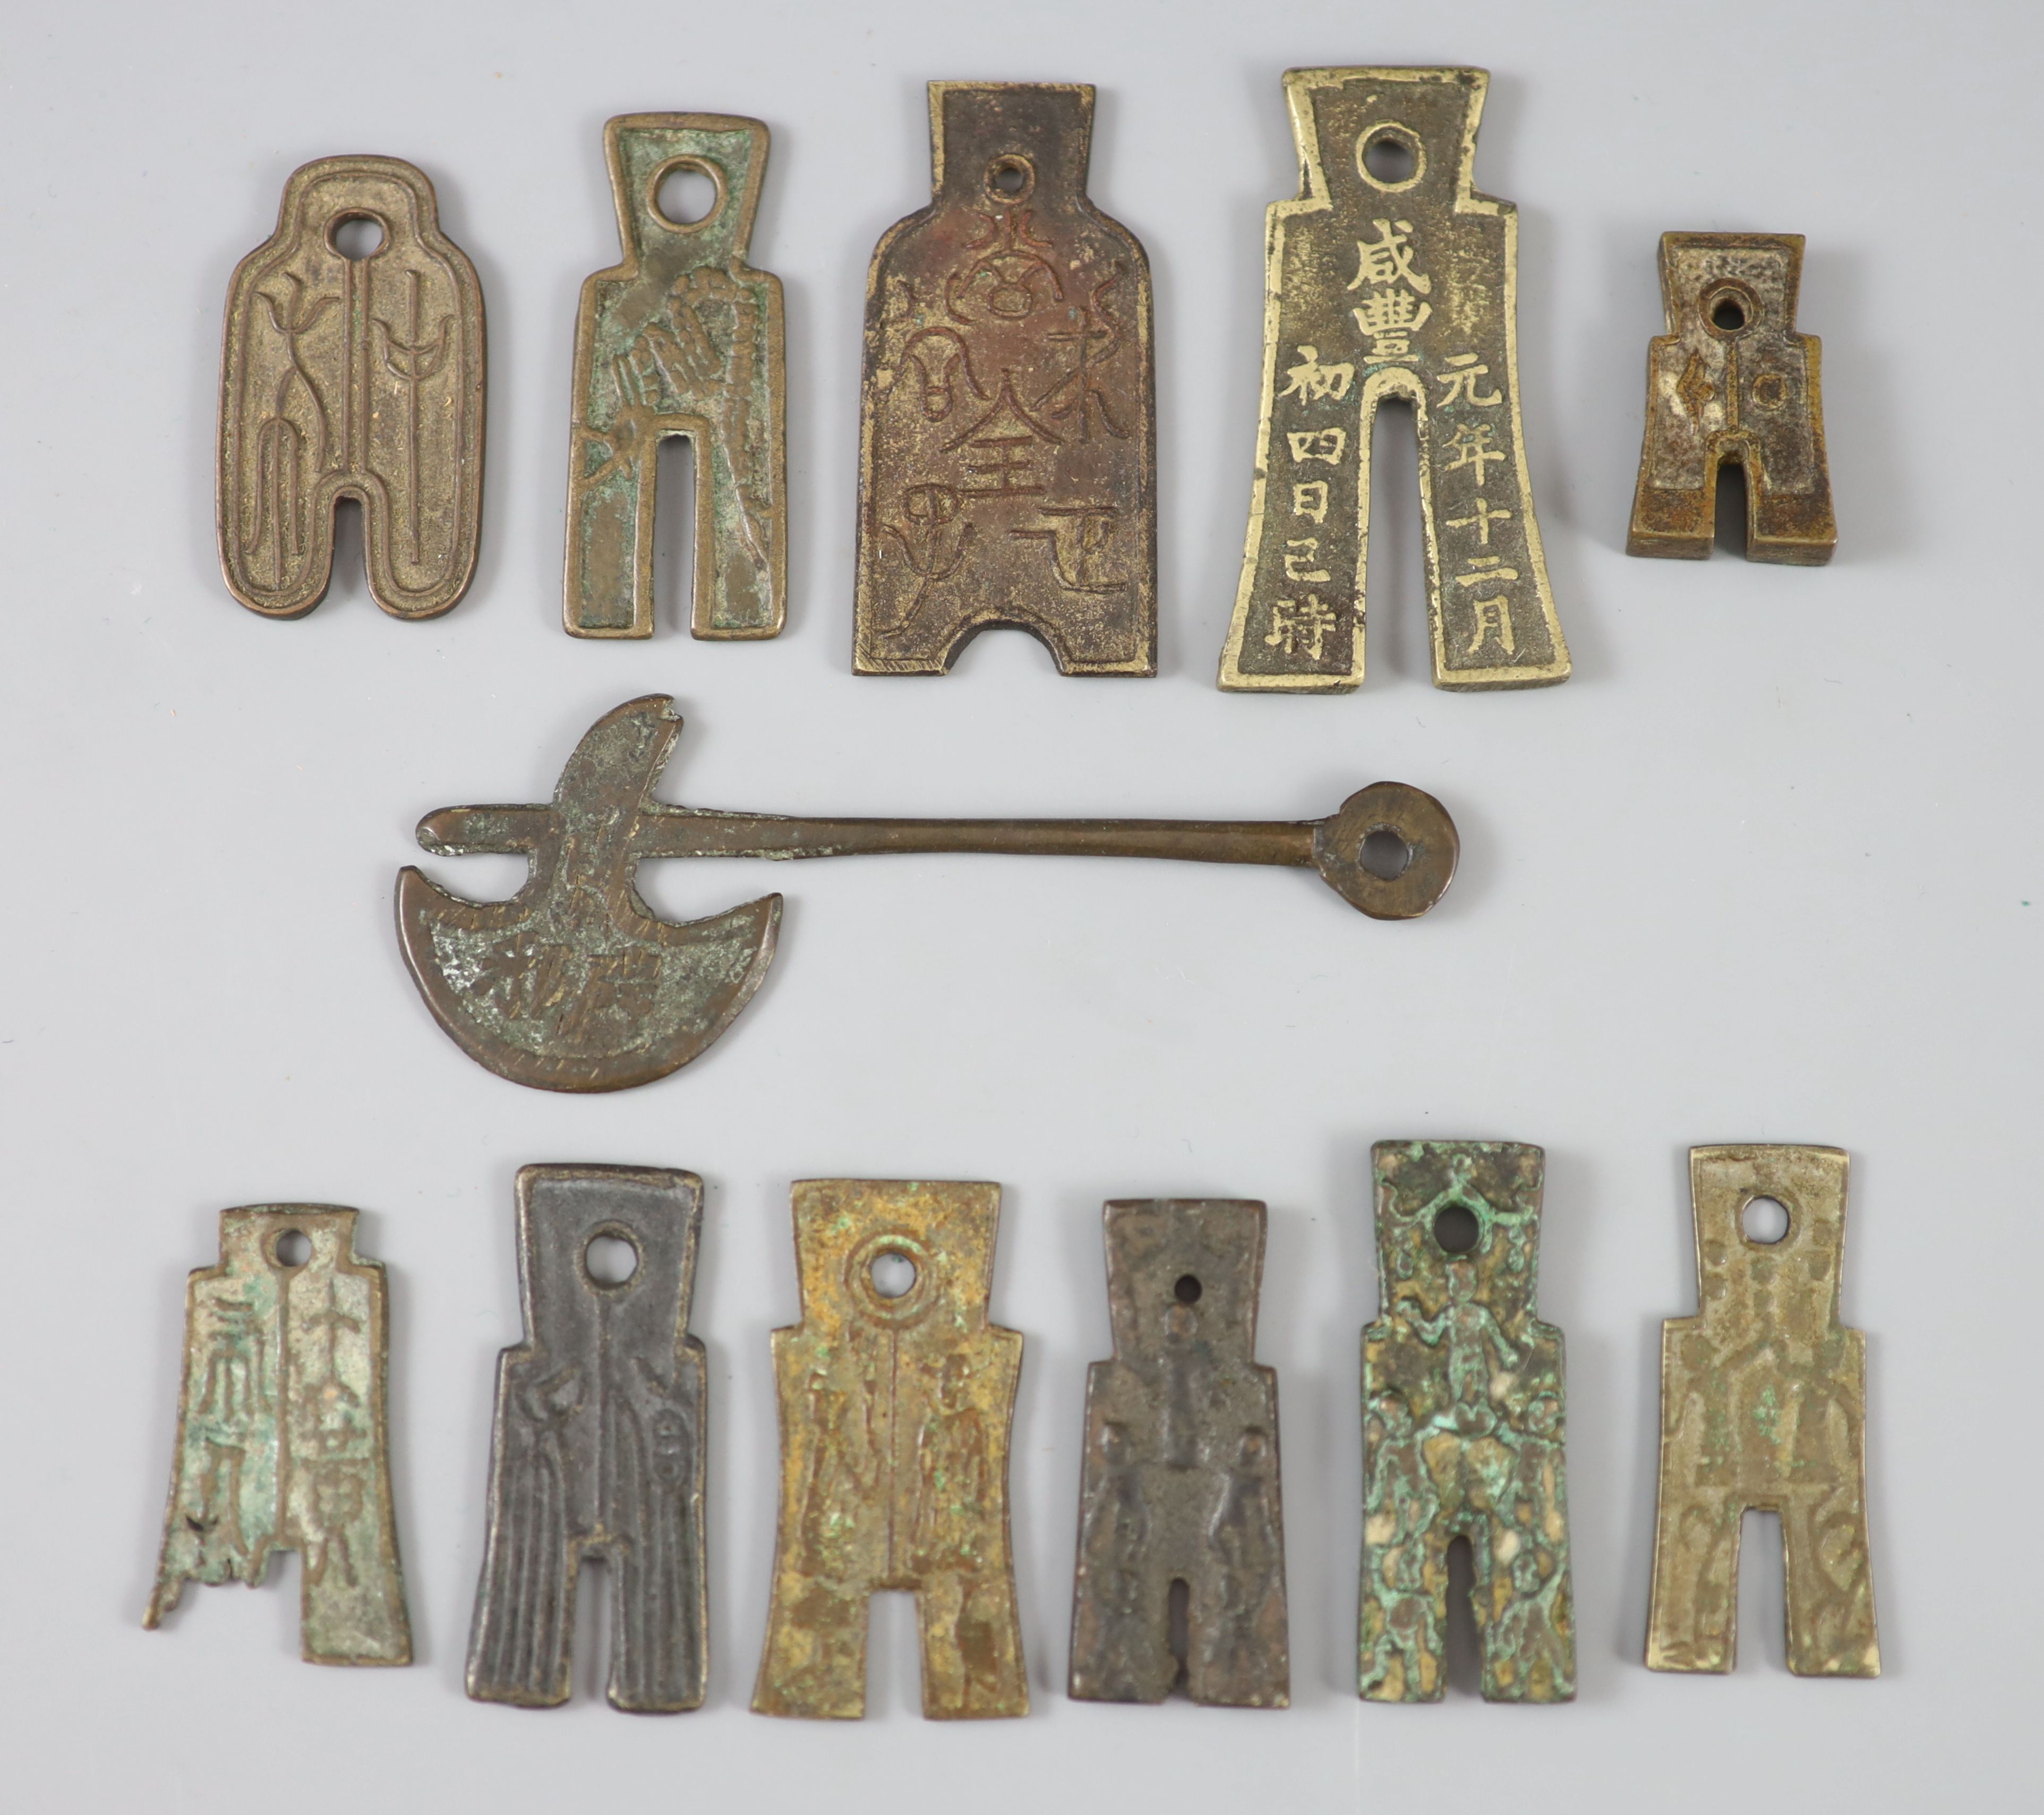 China, 11 bronze spade shaped charms or amulets, Qing dynasty,